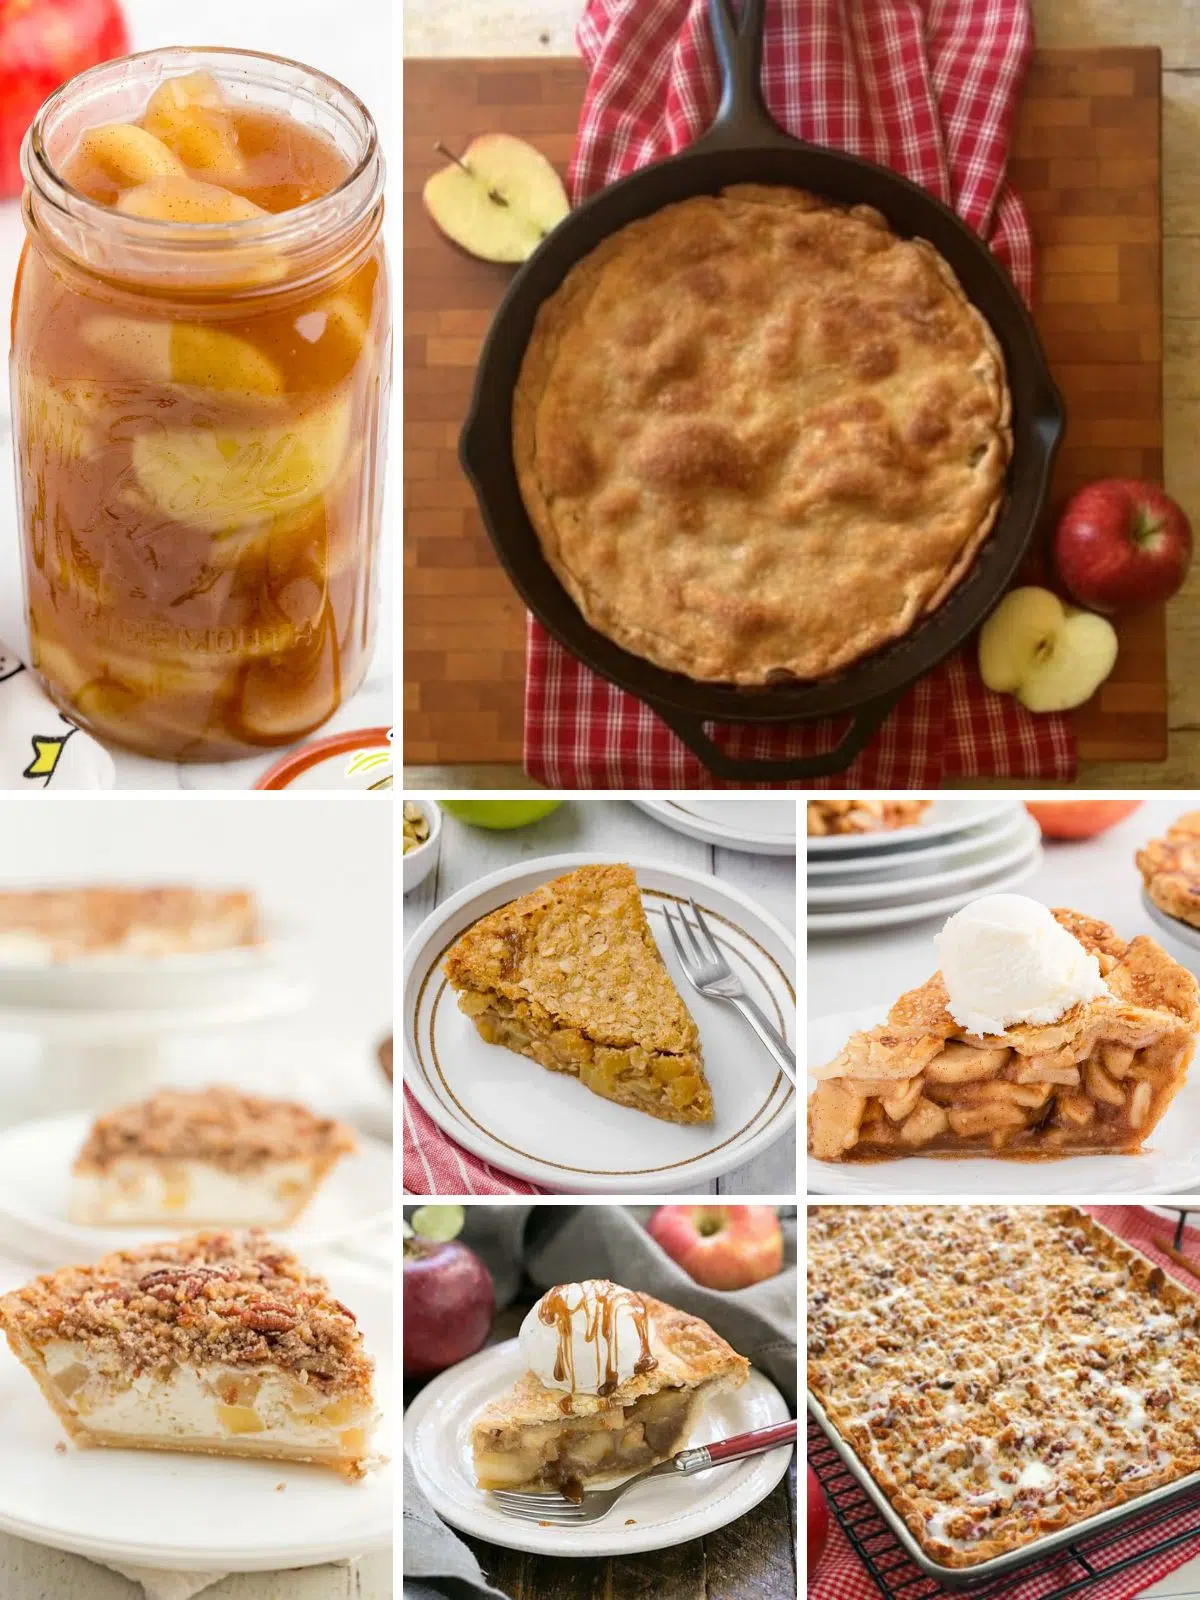 Apple pie recipes featured for Thanksgiving.